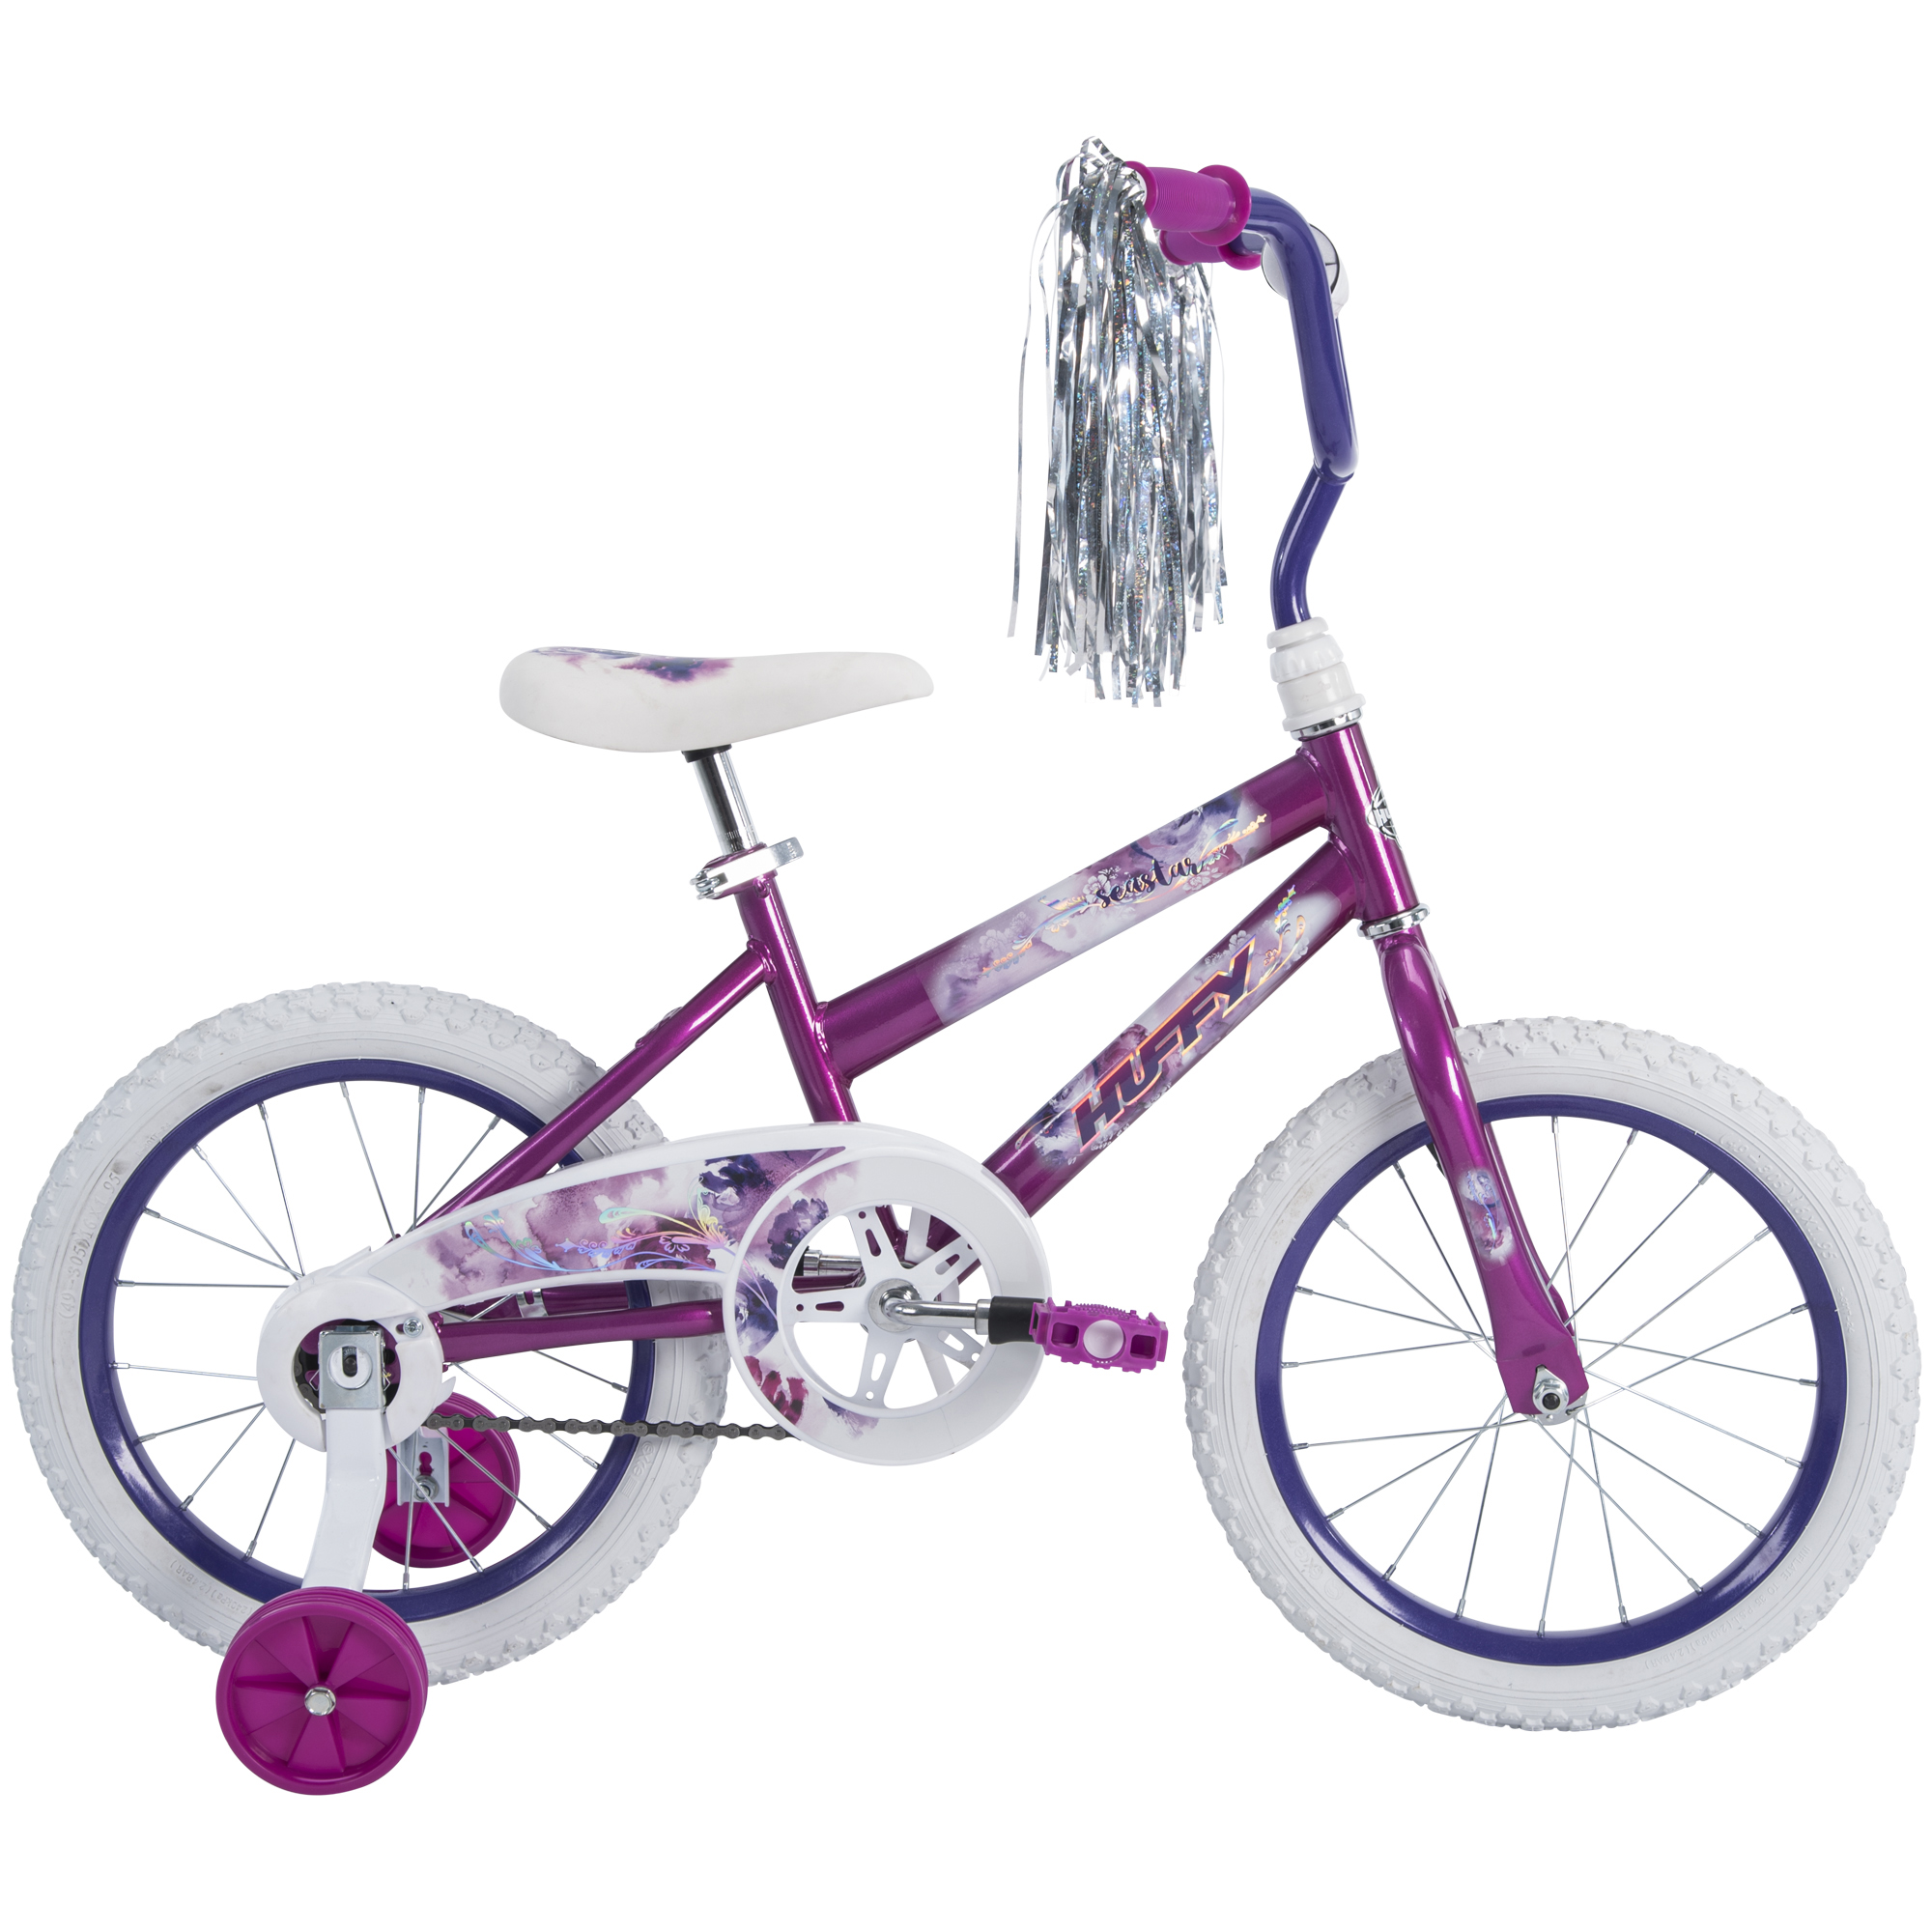 Huffy 16 in. Sea Star Kids Bike for Girls Ages 4 and up, Child, Metallic Purple - image 1 of 10